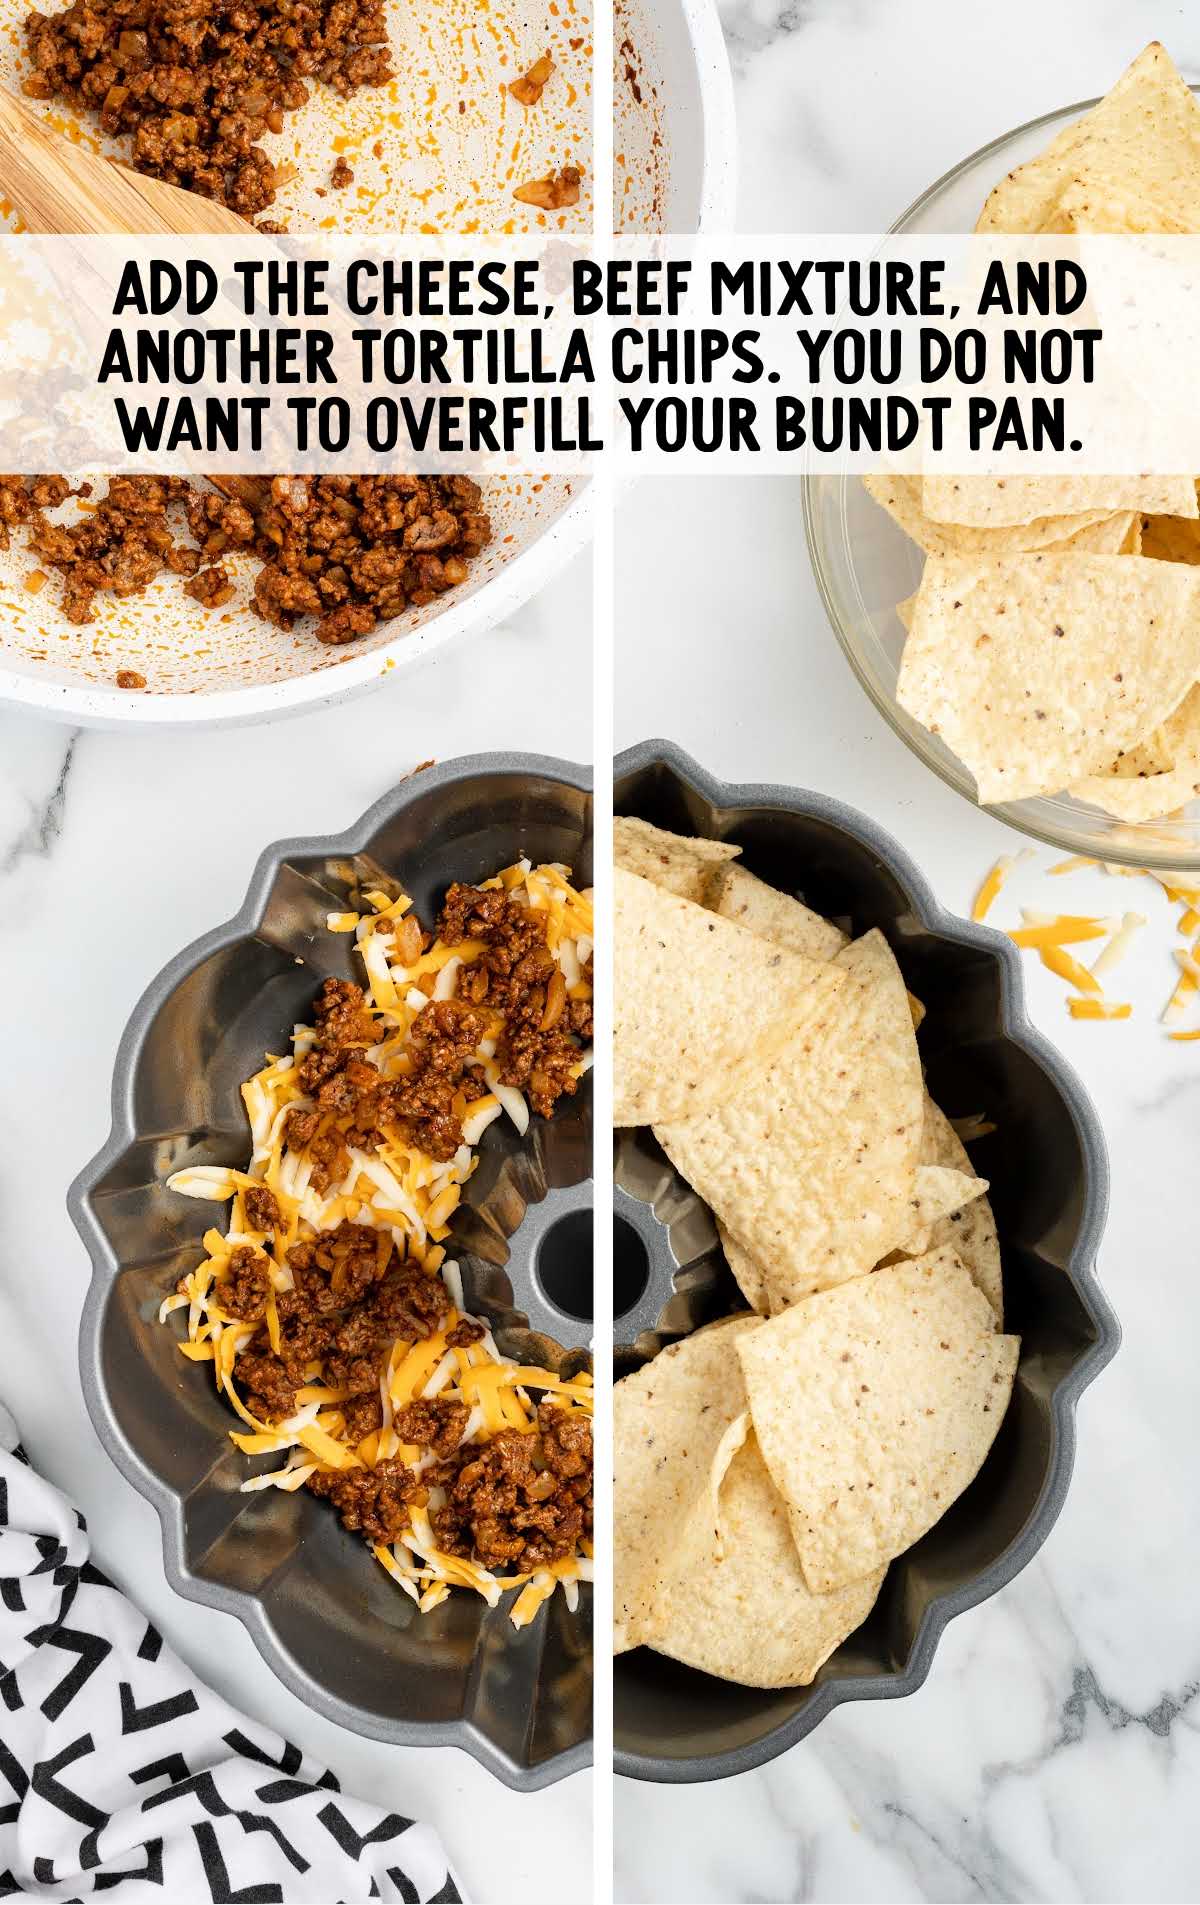 cheese, beef mixture, and tortilla chips added to a Bundt Pan